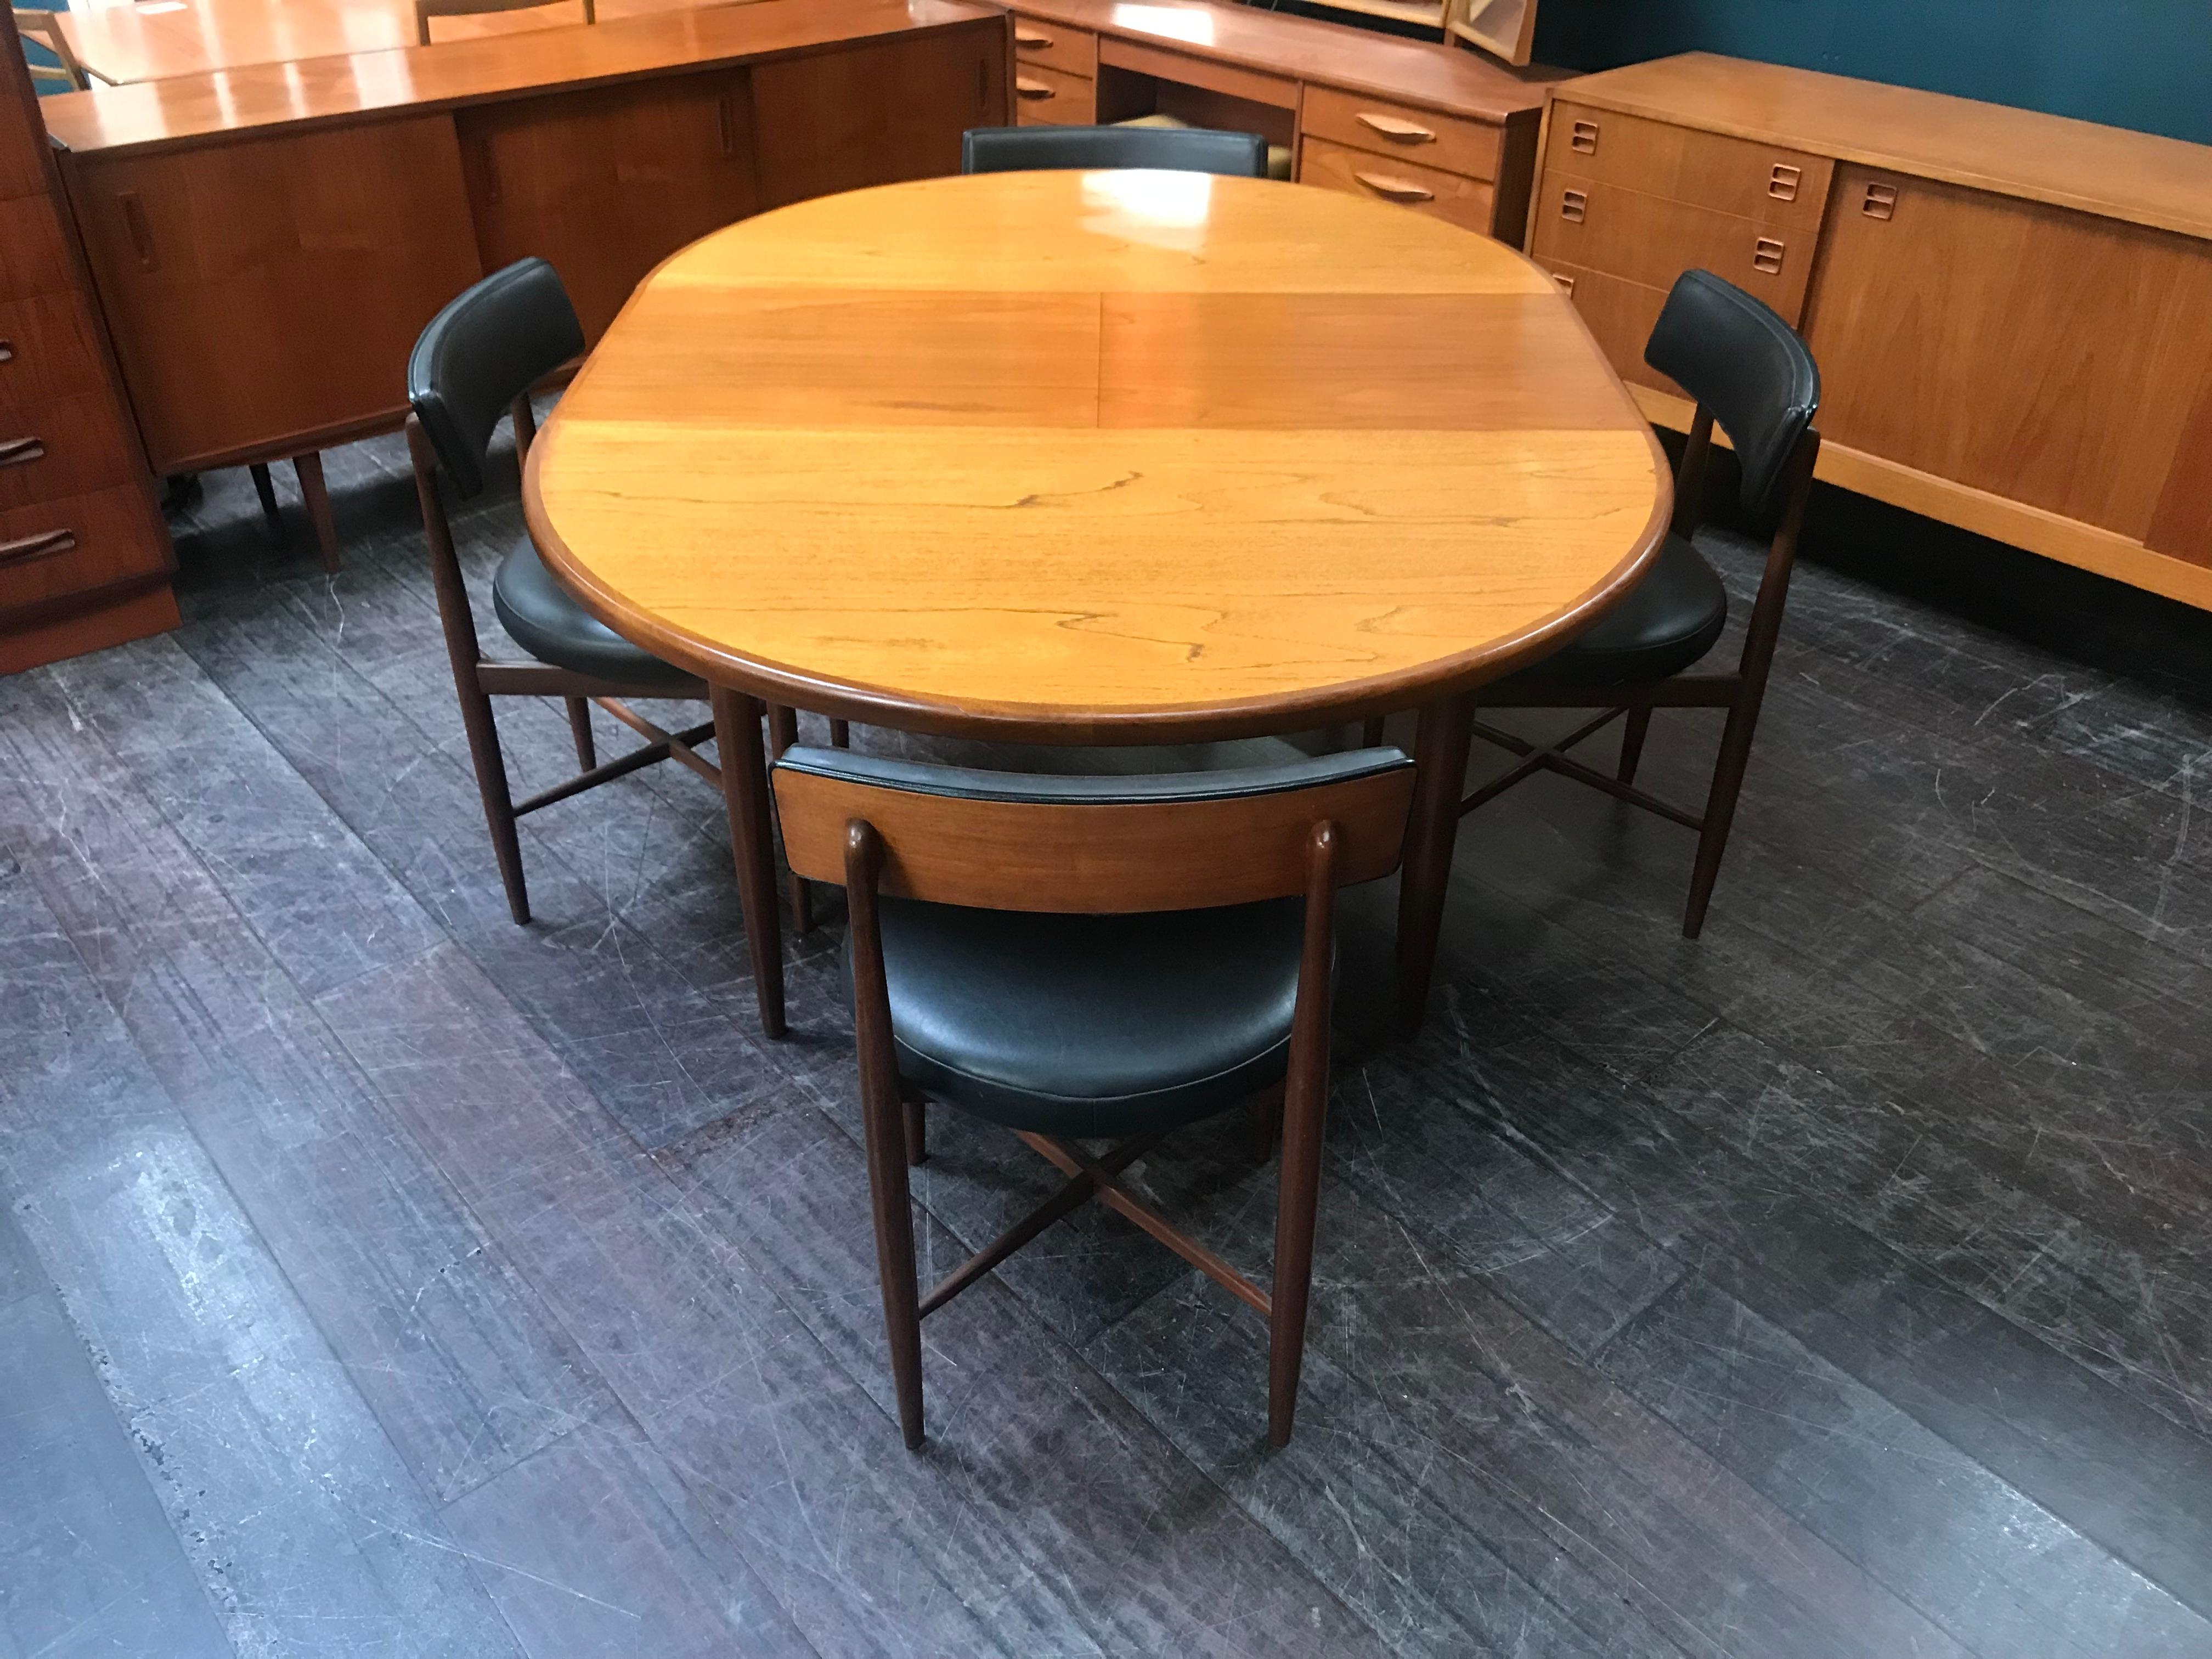 British Midcentury Teak Dining Table G Plan with 4 Chairs by Ib Kofod-Larsen For Sale 3